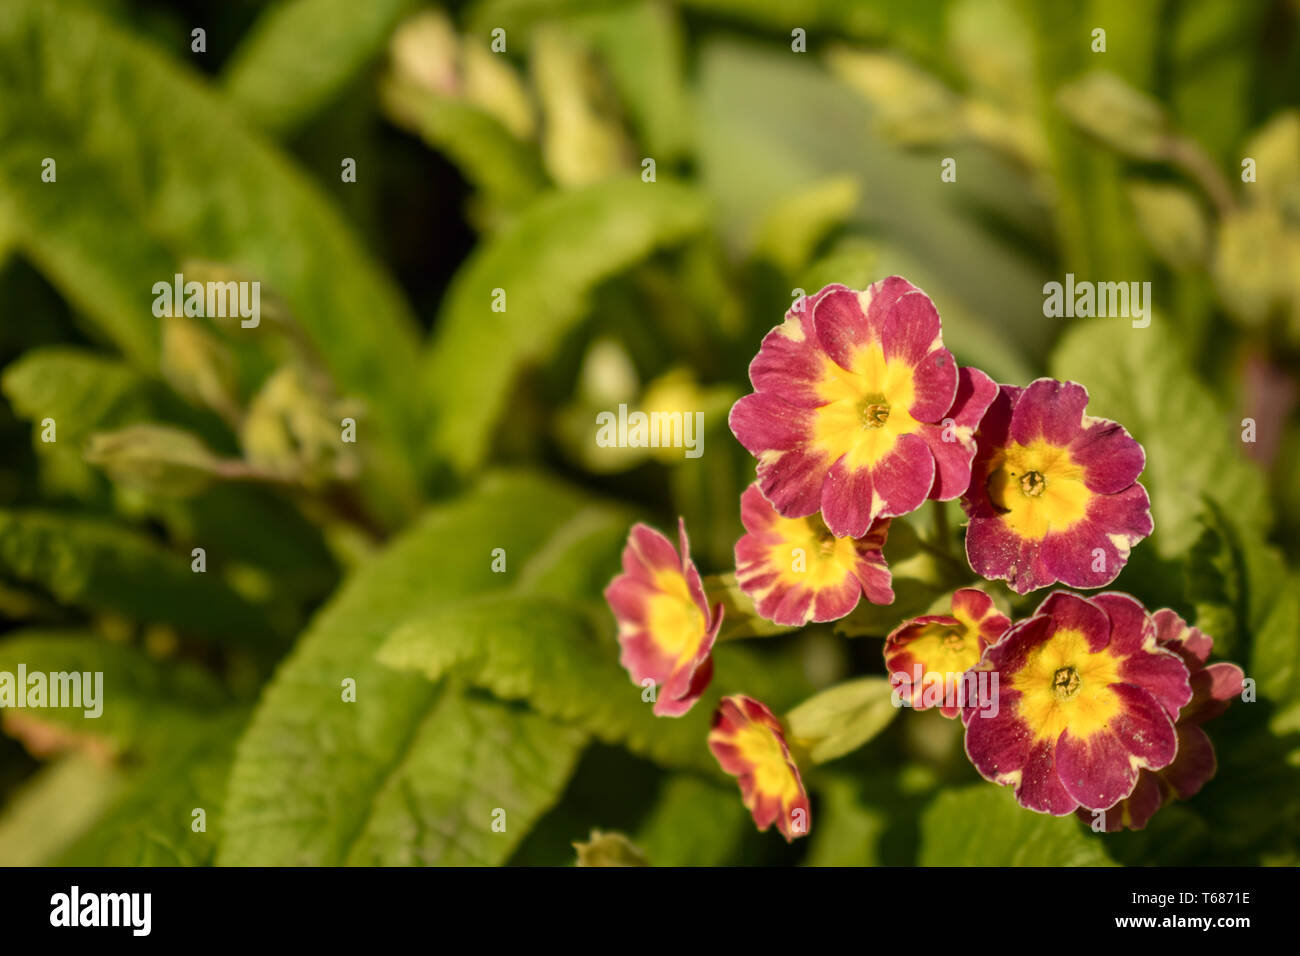 Primrose or primula vulgaris is the first flower blossoming. Hence name primrose or primula. Primrose in spring garden. Stock Photo